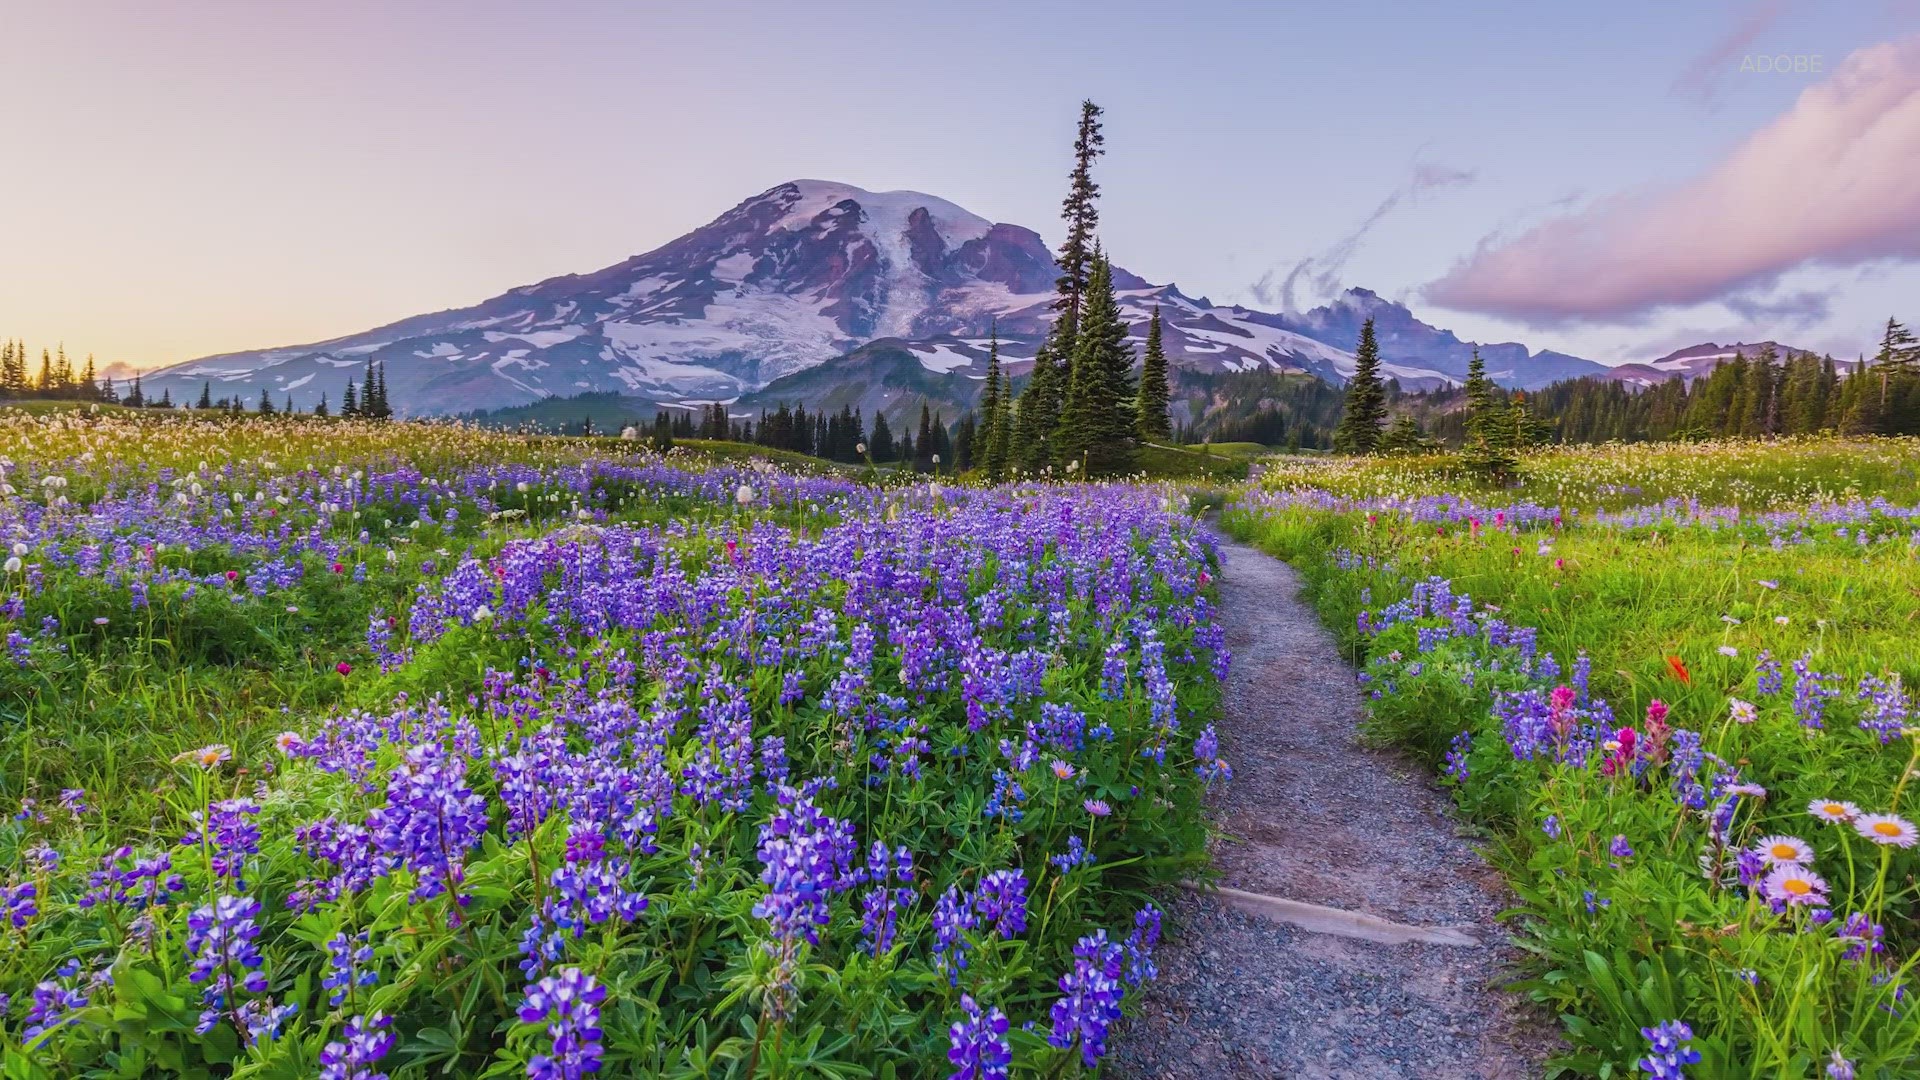 The National Park Service is looking for public feedback on potential entry changes at Mount Rainier National Park